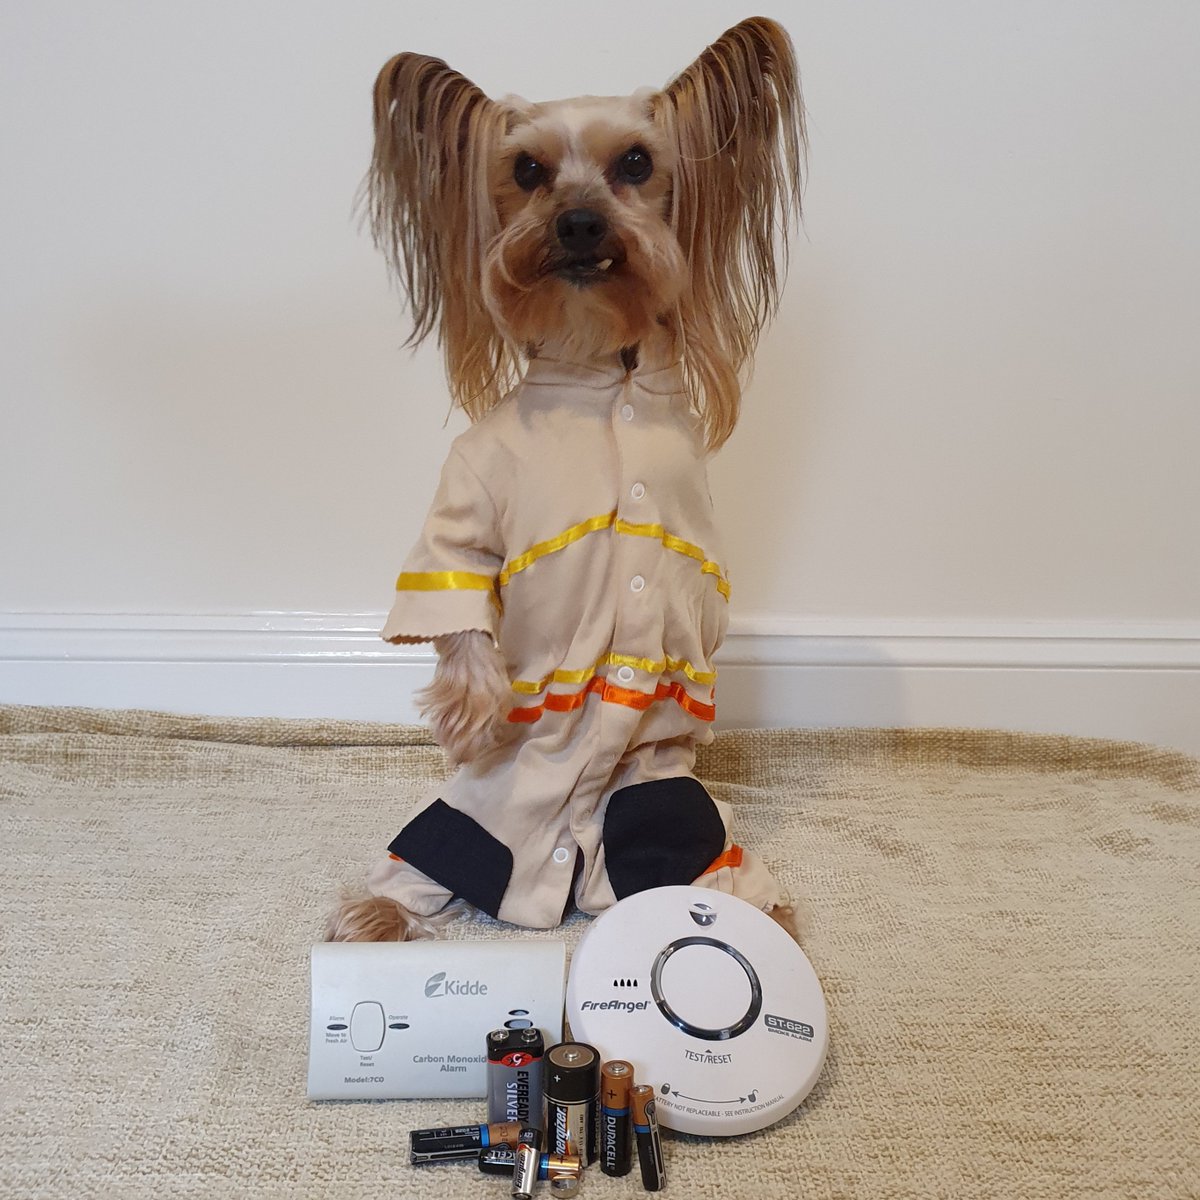 I hopes yous nose what day it do be!

Times to #PushTheButton & #PressToTest yous Smoke & Carbon Monoxide Alarms as it do be #TestItTuesday

#MrPels #BarkshireFirefighter #firesafety #FireSafetyTips